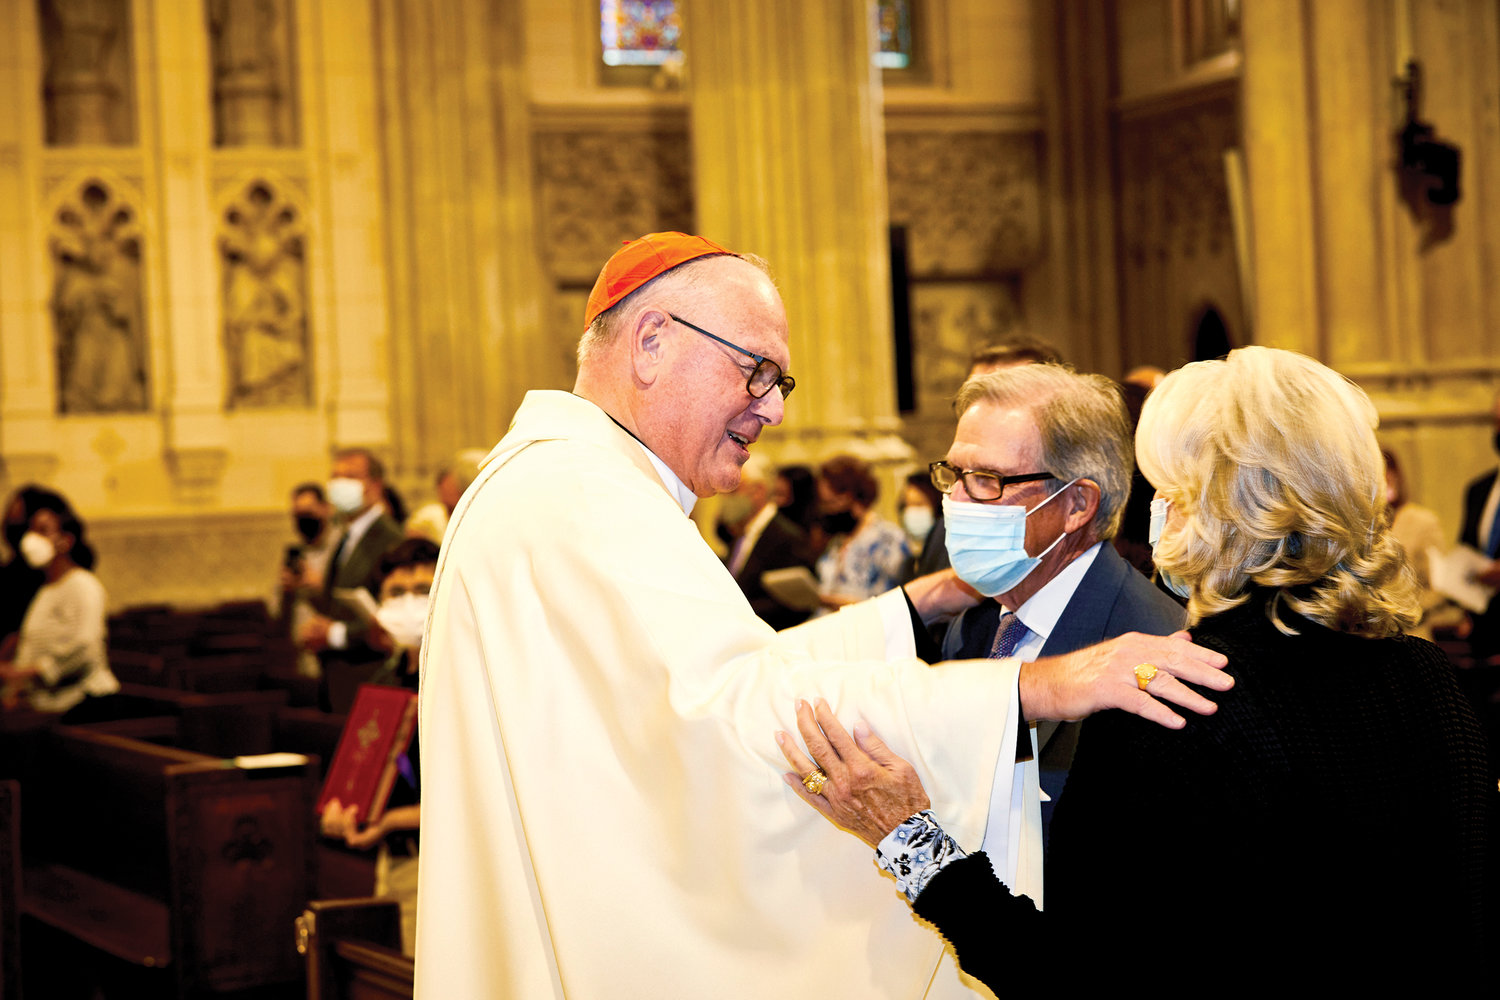 Cardinal Dolan greets Peter T. Grauer and his wife Laurie. Grauer is president of the Inner-City Scholarship Fund’s Board of Trustees.